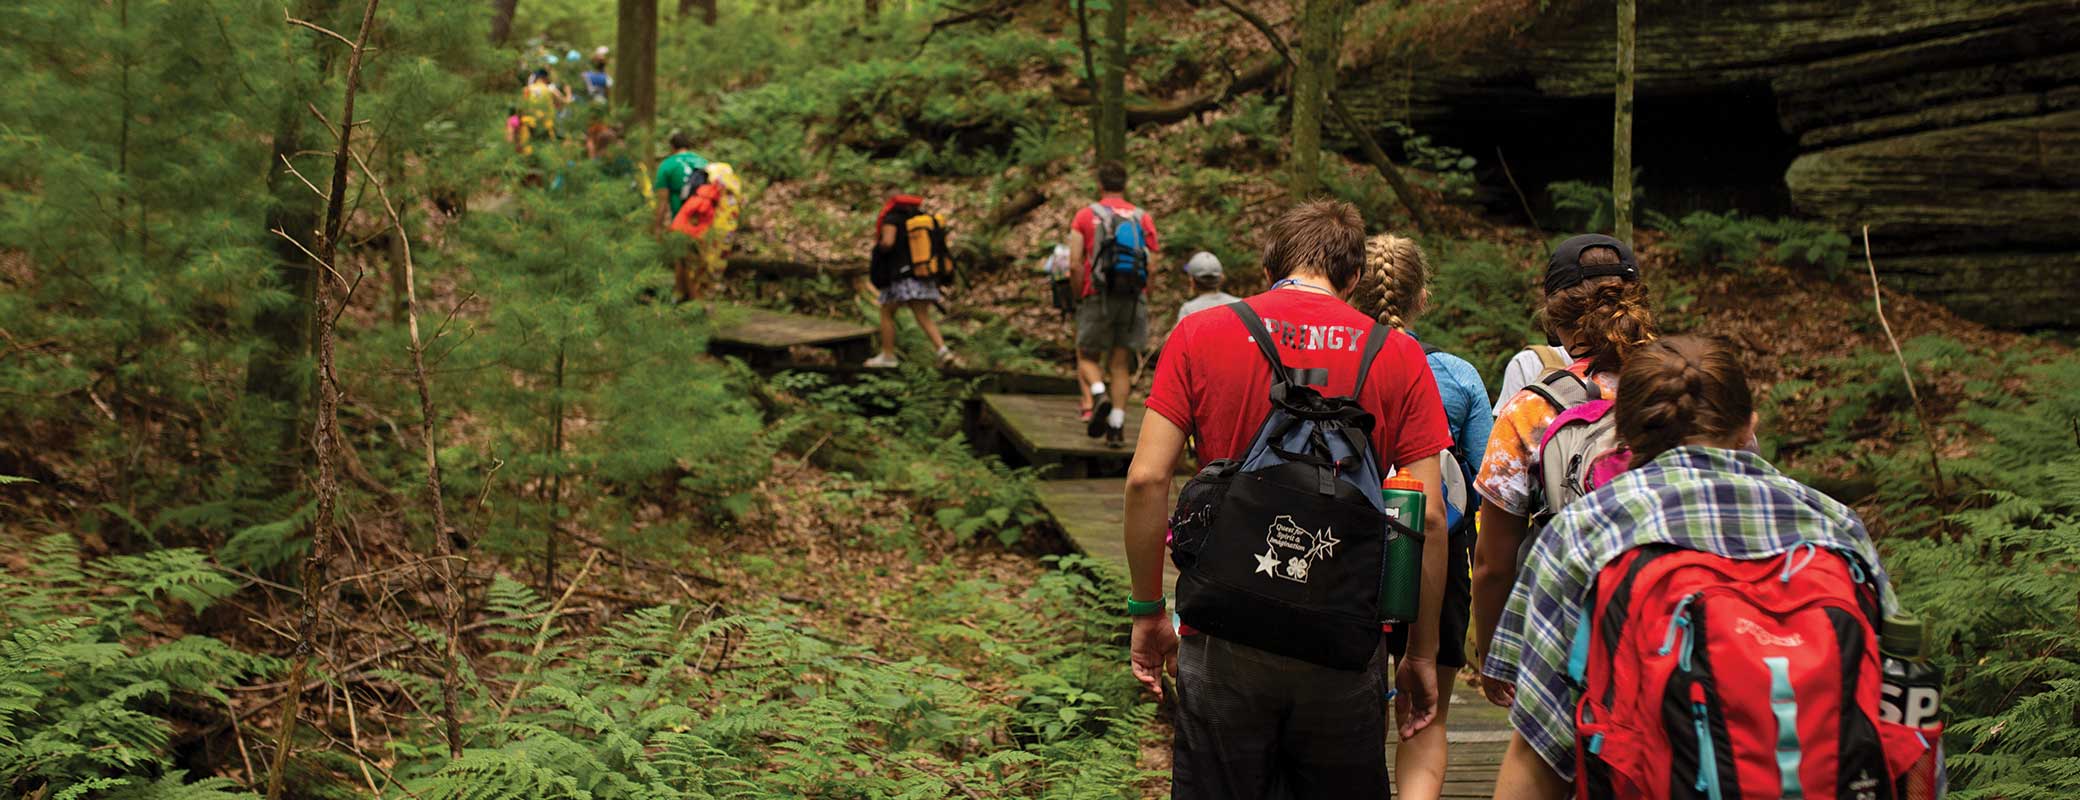 A group of students hiking in a wooded rocky area